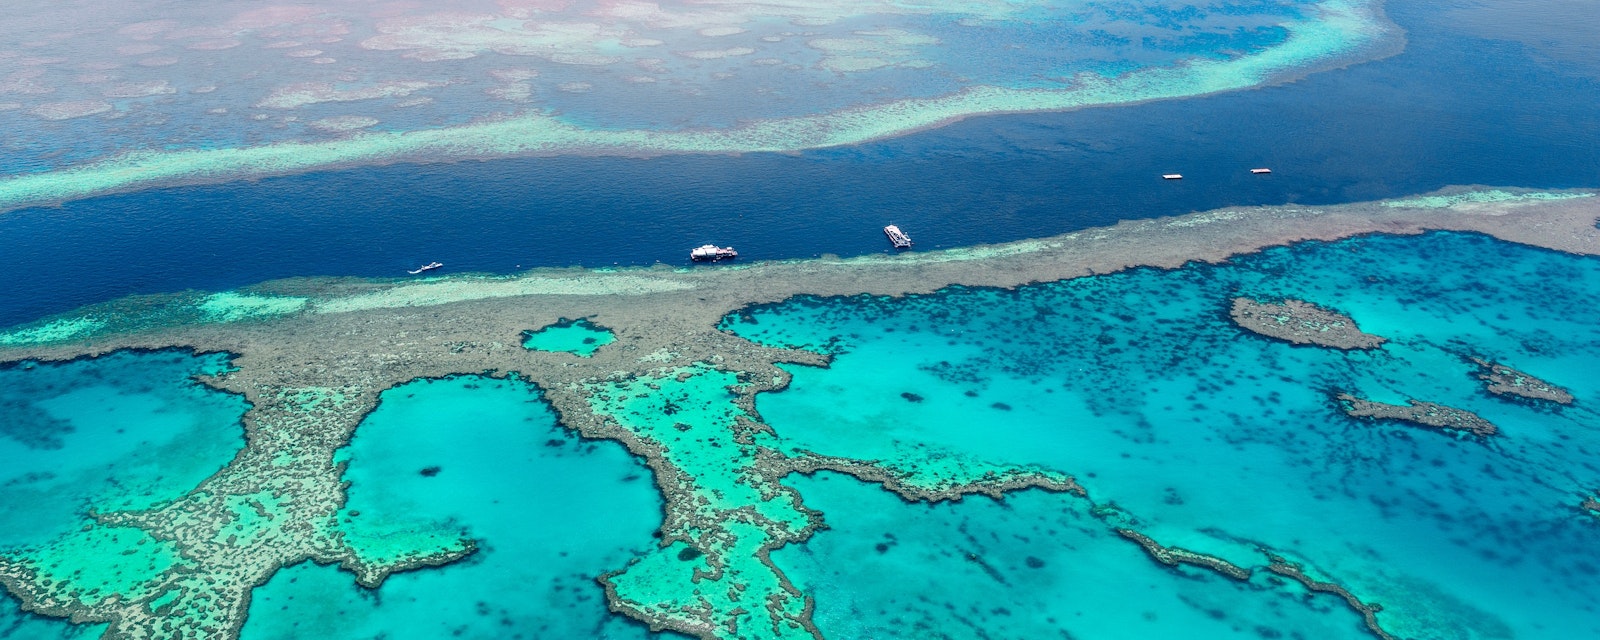 Aerial,View,Of,The,Great,Barrier,Reef